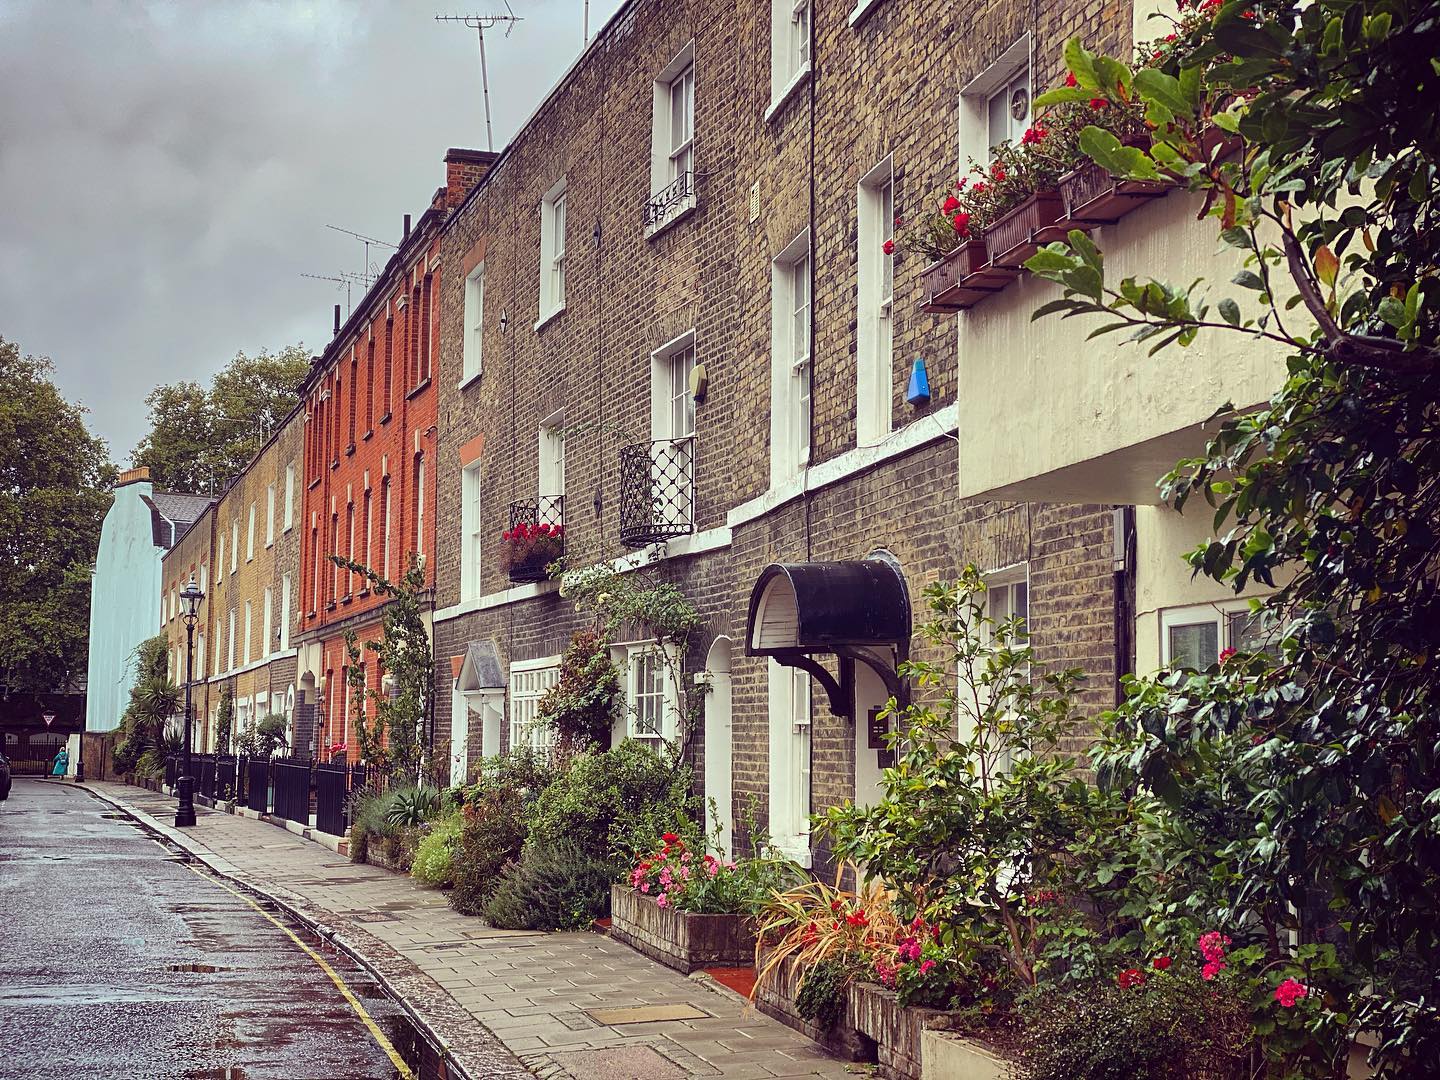 Staying at Louise House means living in a chic area with quintessential London style, all within an easy 2 minute walk ️ . . .